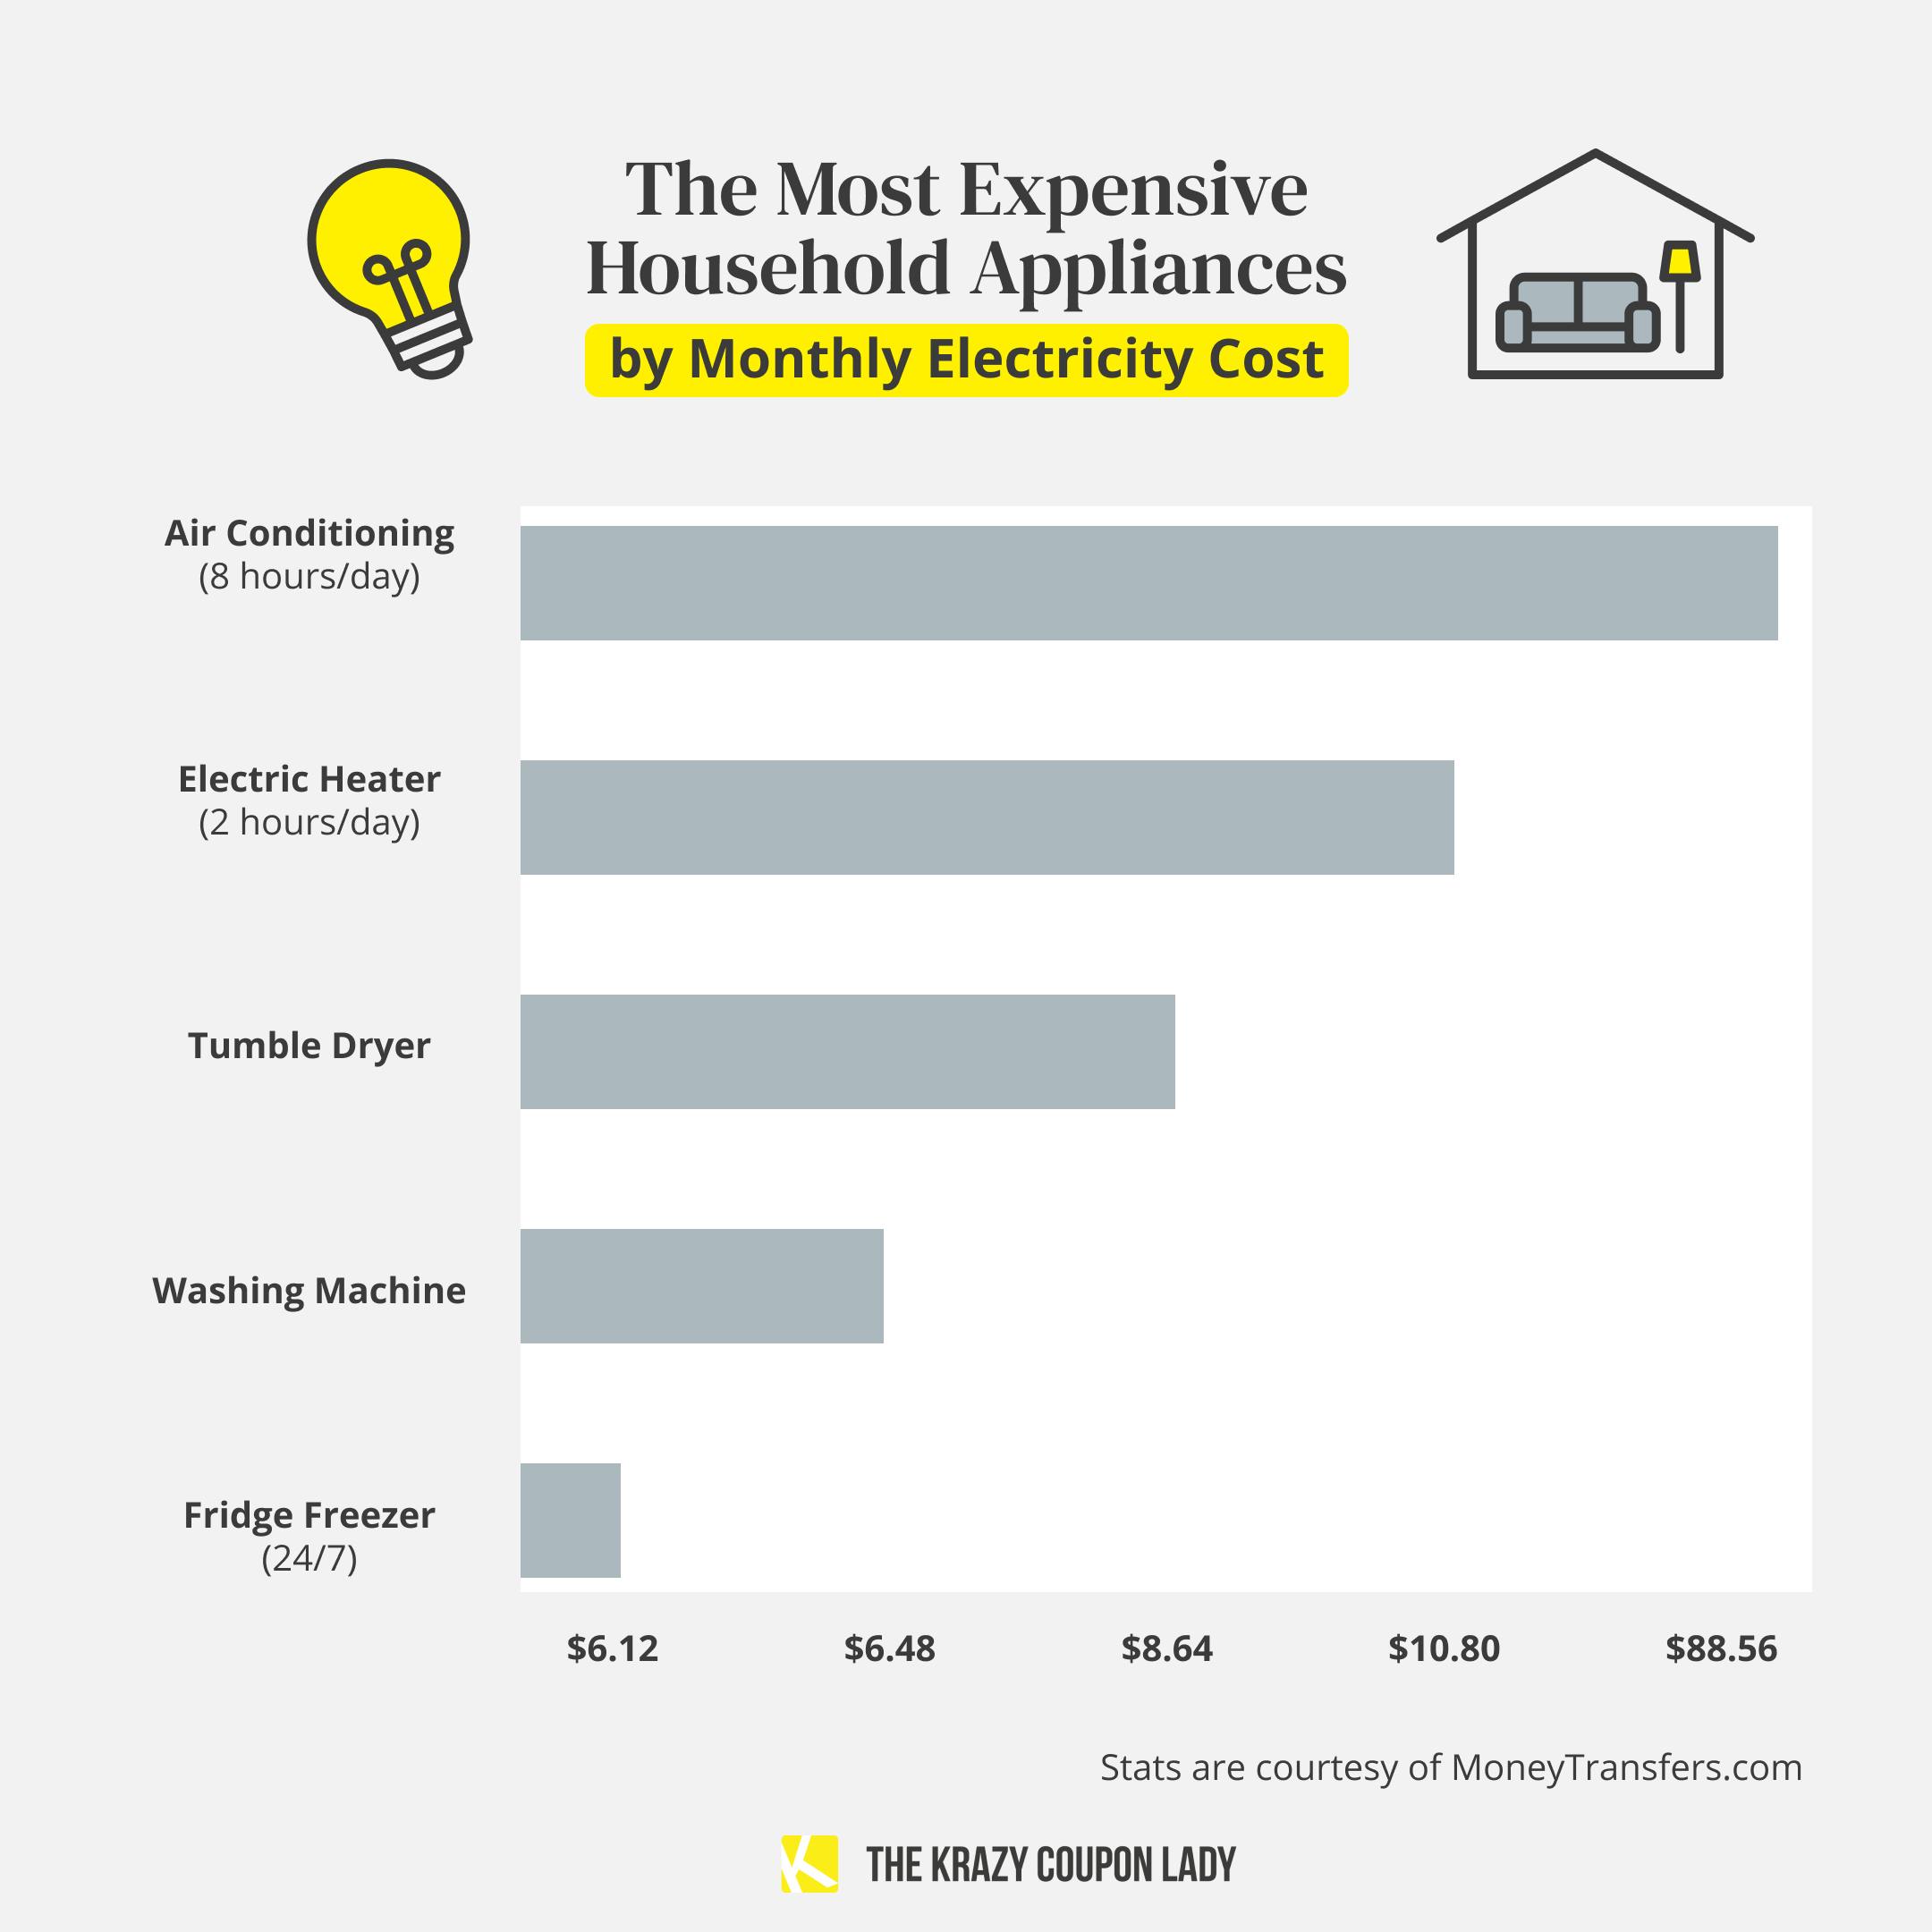 A chart showing the most expensive household appliances by monthly electricity cost with air conditioning being the most expensive at $88.56, followed by electric heater at $10.80, tumble dryer at $8.64, washing machine at $6.48, and fridge freezer at $6.12